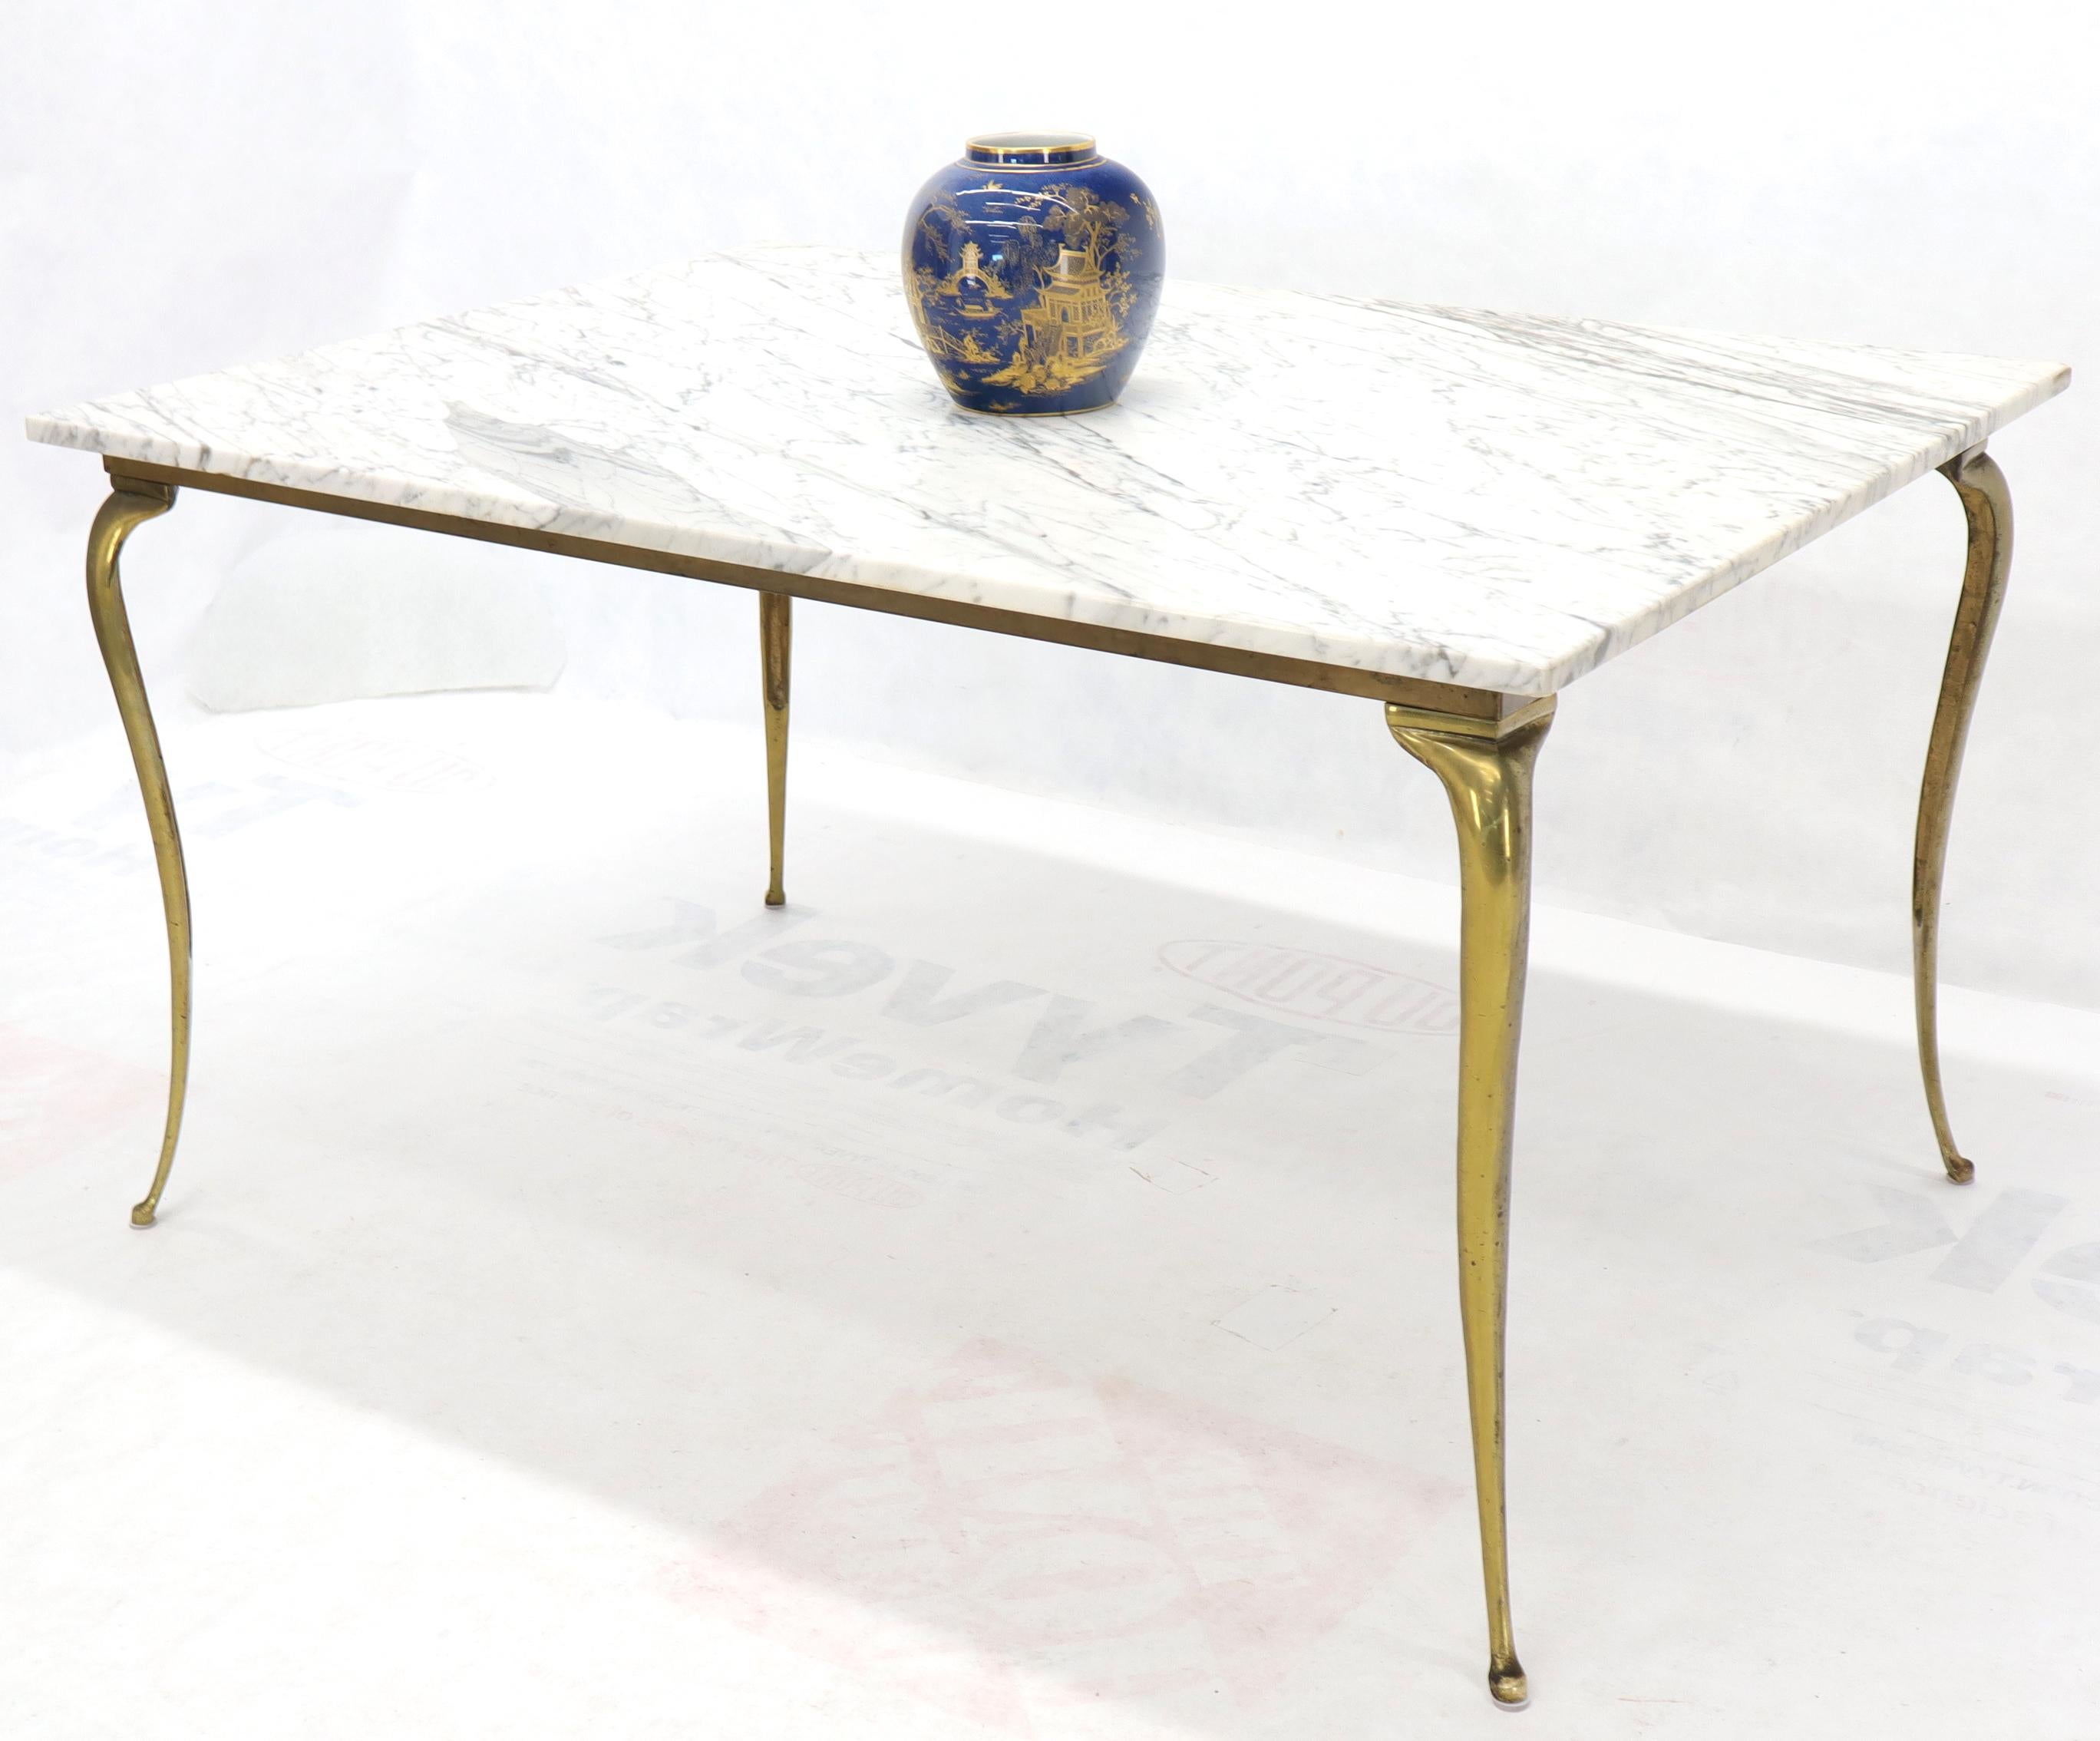 20th Century Rectangular Marble-Top Dining Table on Brass Legs